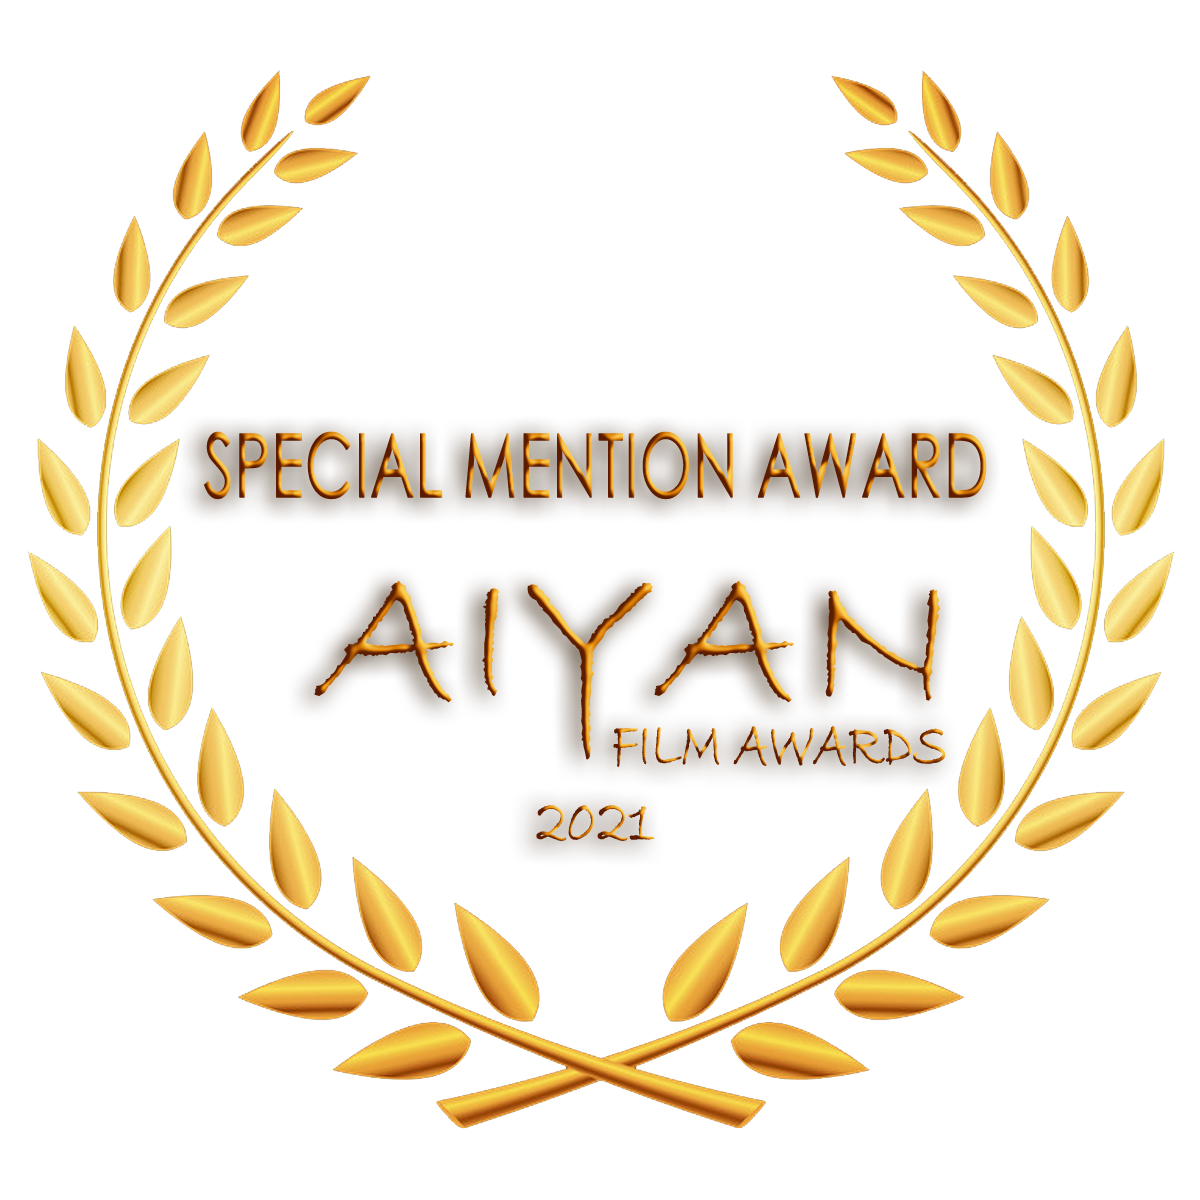 SPECIAL MENTION AWARD